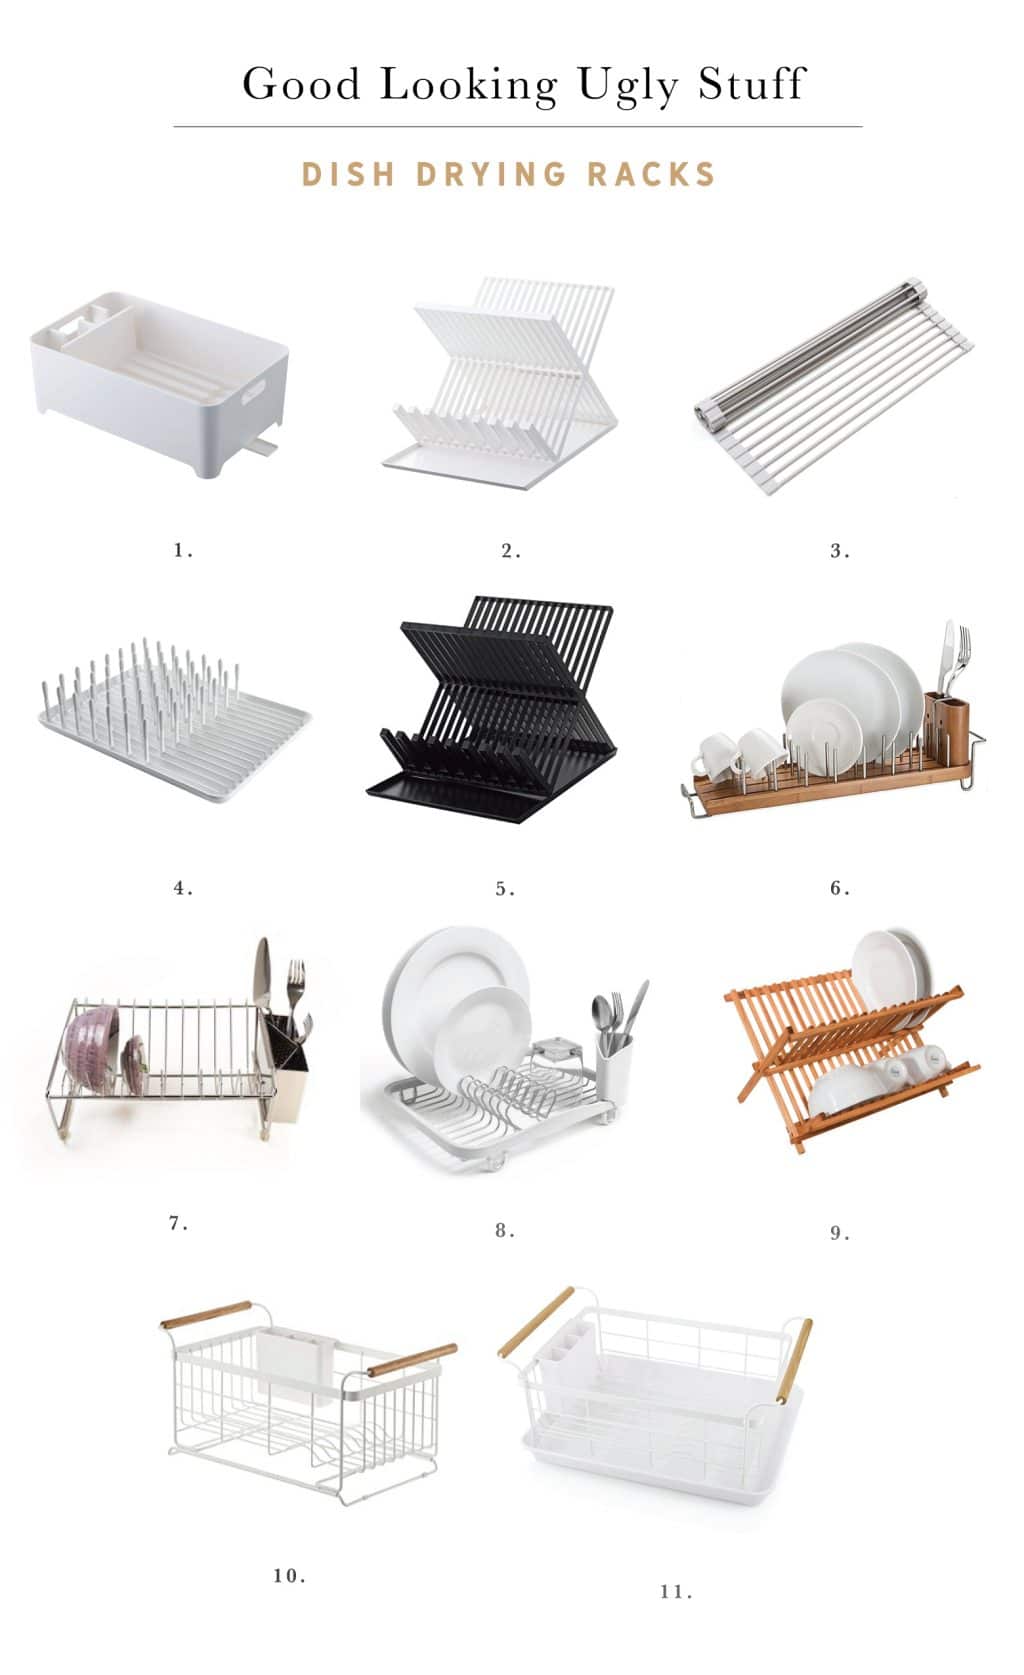 Good Looking Ugly Stuff: Dish Drying Racks, Plungers and Toilet Brushes -  Chris Loves Julia